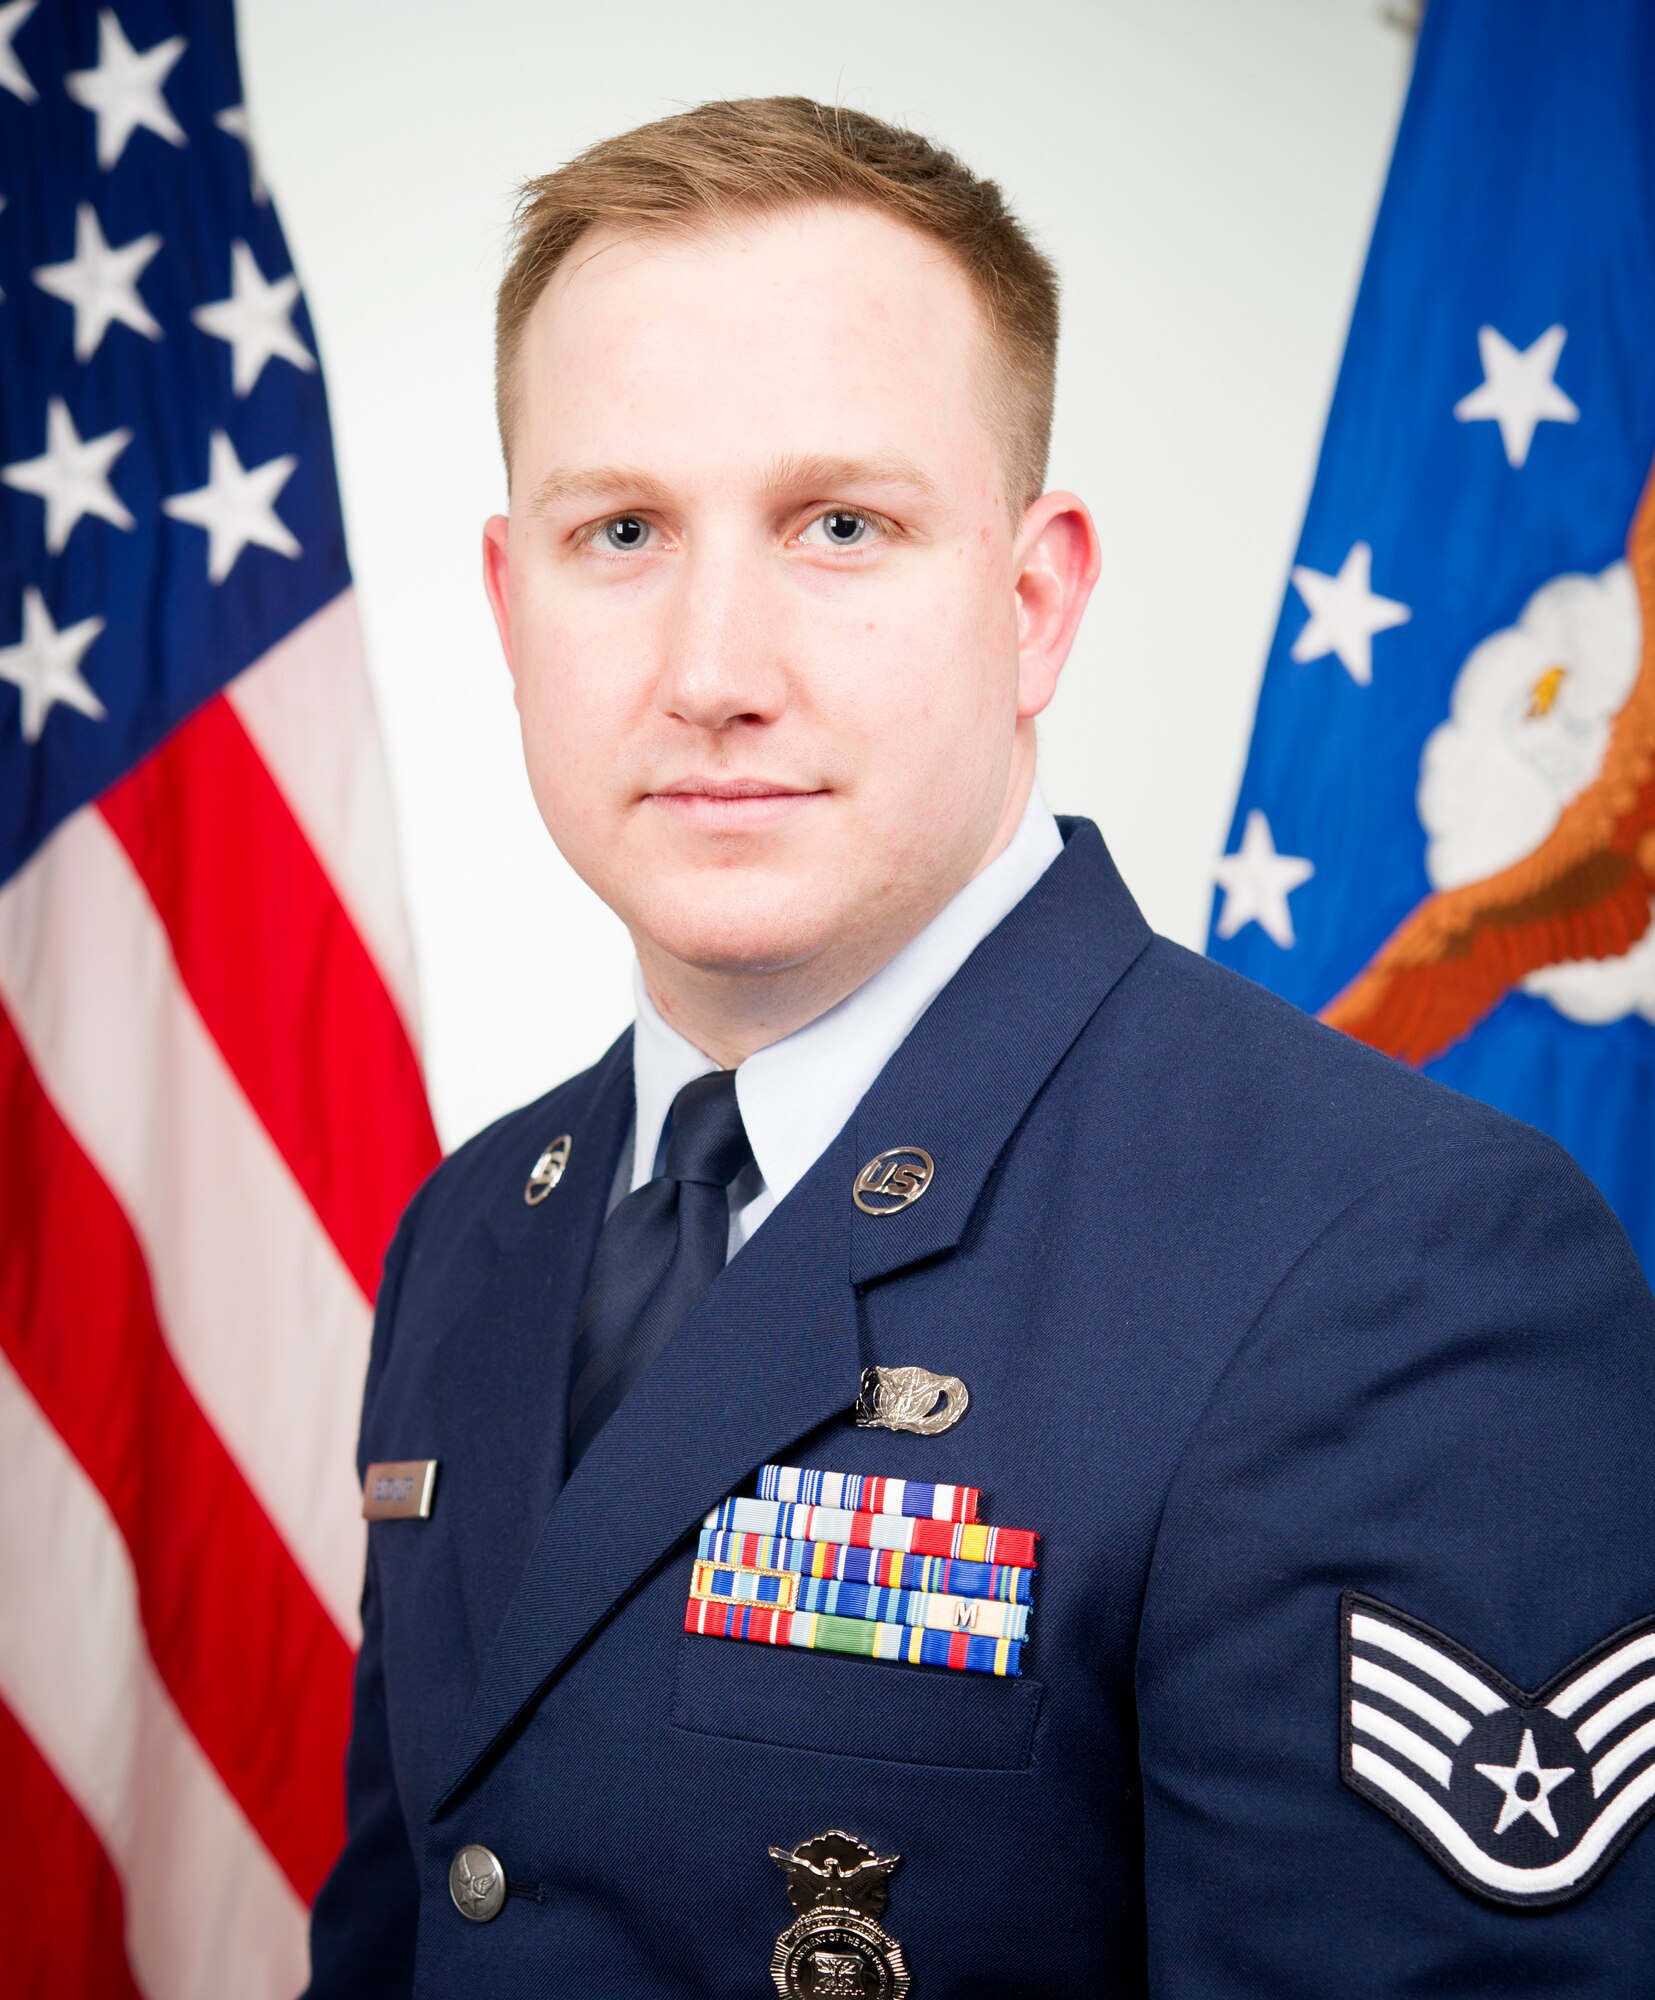 Staff Sgt. Lance Buechler, poses for a photo at Grissom Air Reserve Base, Ind., March 7, 2020. Buechler was named as the 2019 Outstanding Security forces Airman in recognition of his hard work and leadership. (U.S. Air Force photo/Master Sgt. Benjamin Mota)